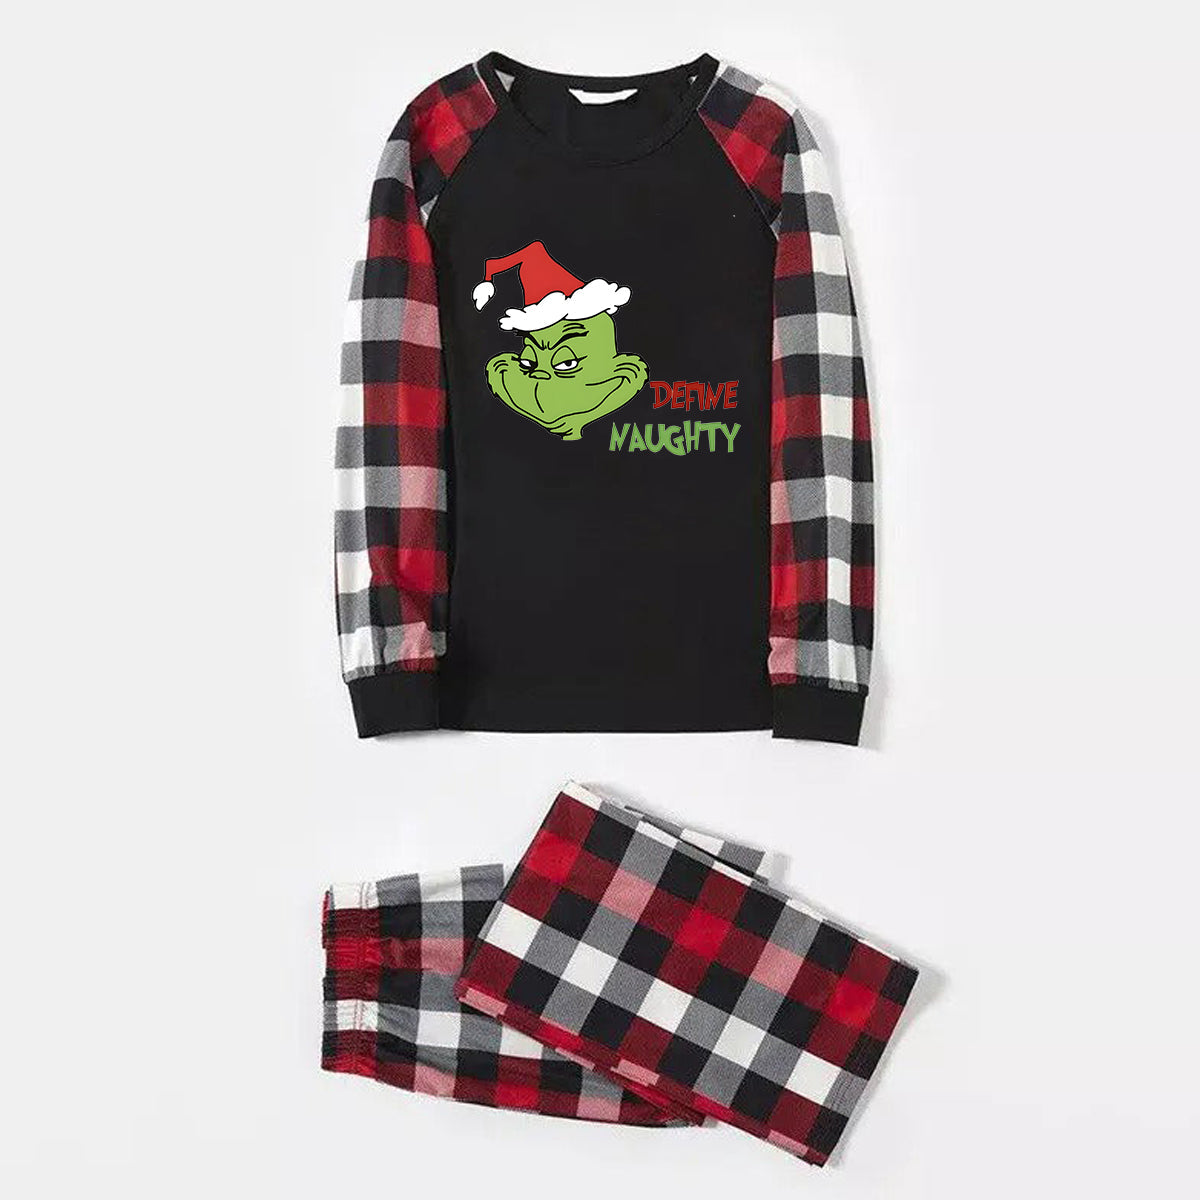 Christmas 'Define Naughty' Letter Print Patterned Casual Long Sleeve Sweatshirts Contrast Tops and Red & Black & White Plaid Pants Family Matching Pajamas Set With Dog Bandana